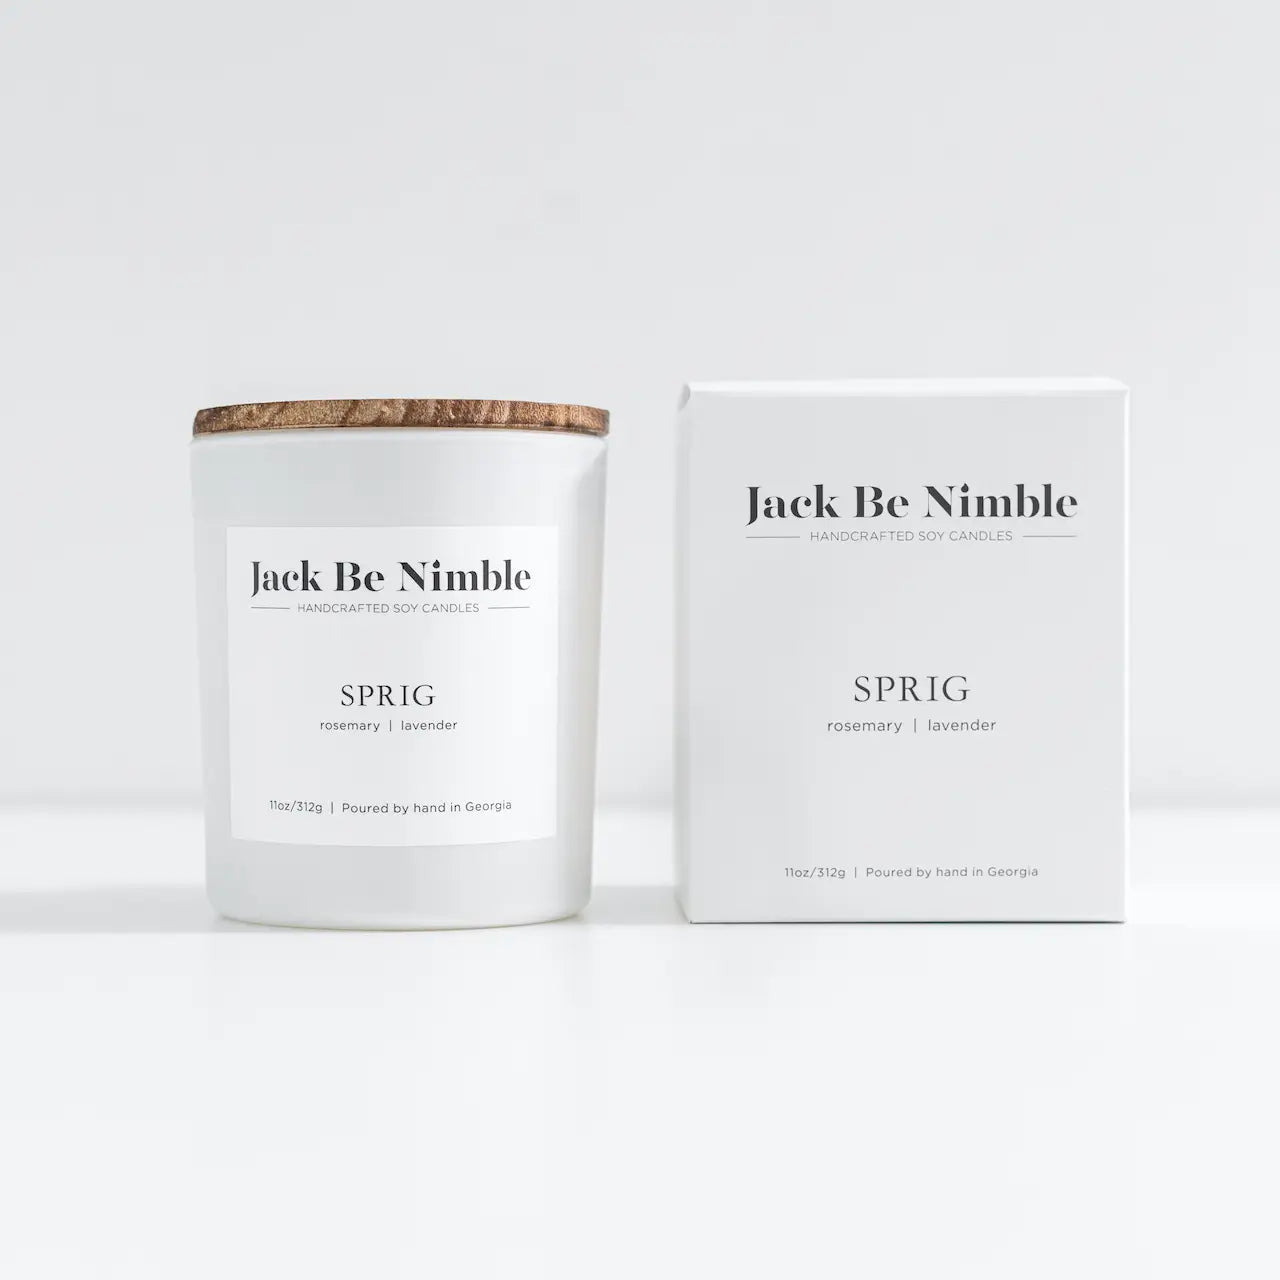 Petite 5.5 oz. Scented Soy Candle